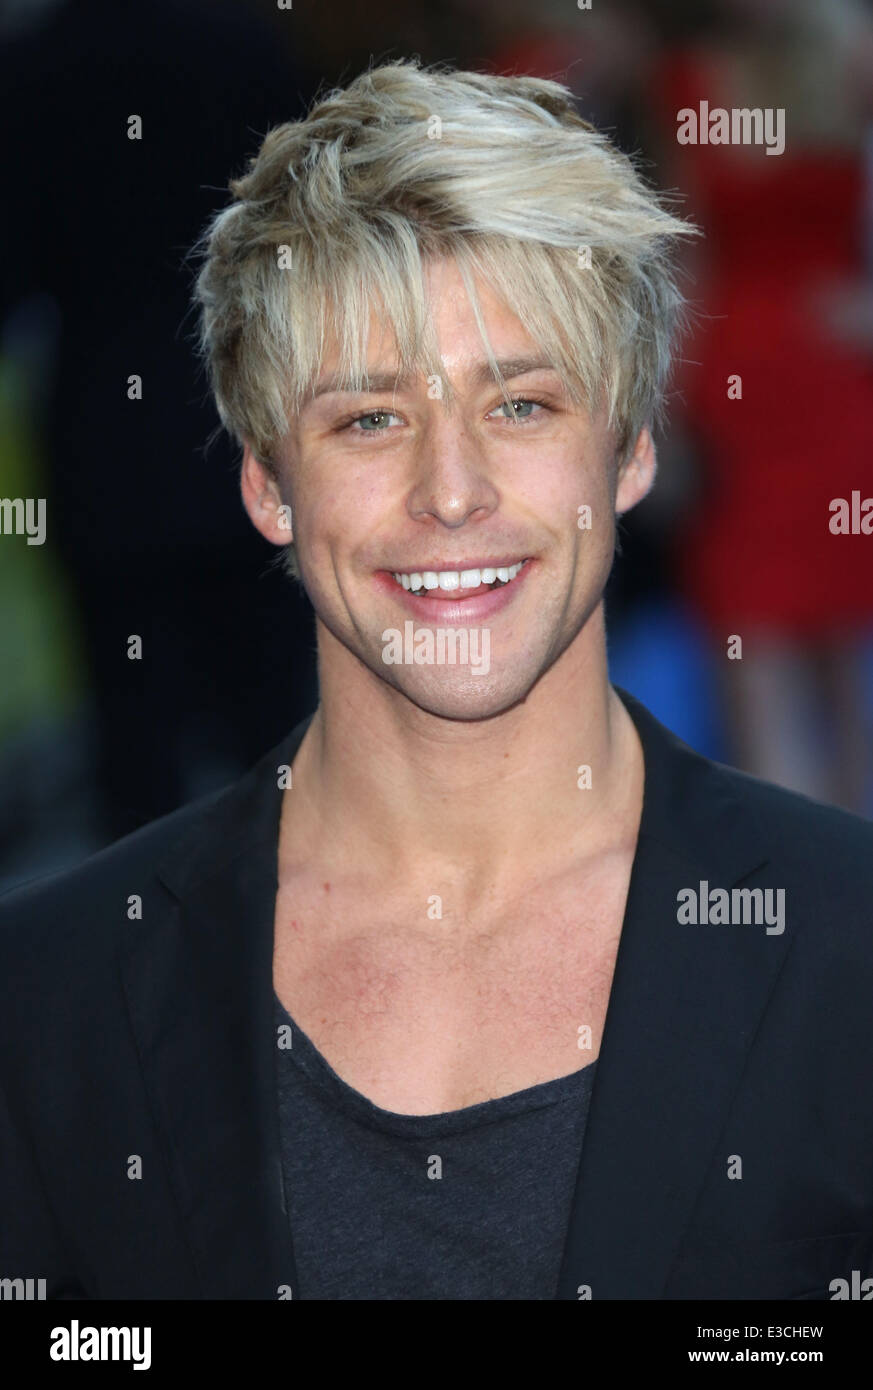 UK premiere of Filth held at the Odeon - Arrivals  Featuring: Mitch Hewer Where: London, United Kingdom When: 30 Sep 2013 Stock Photo